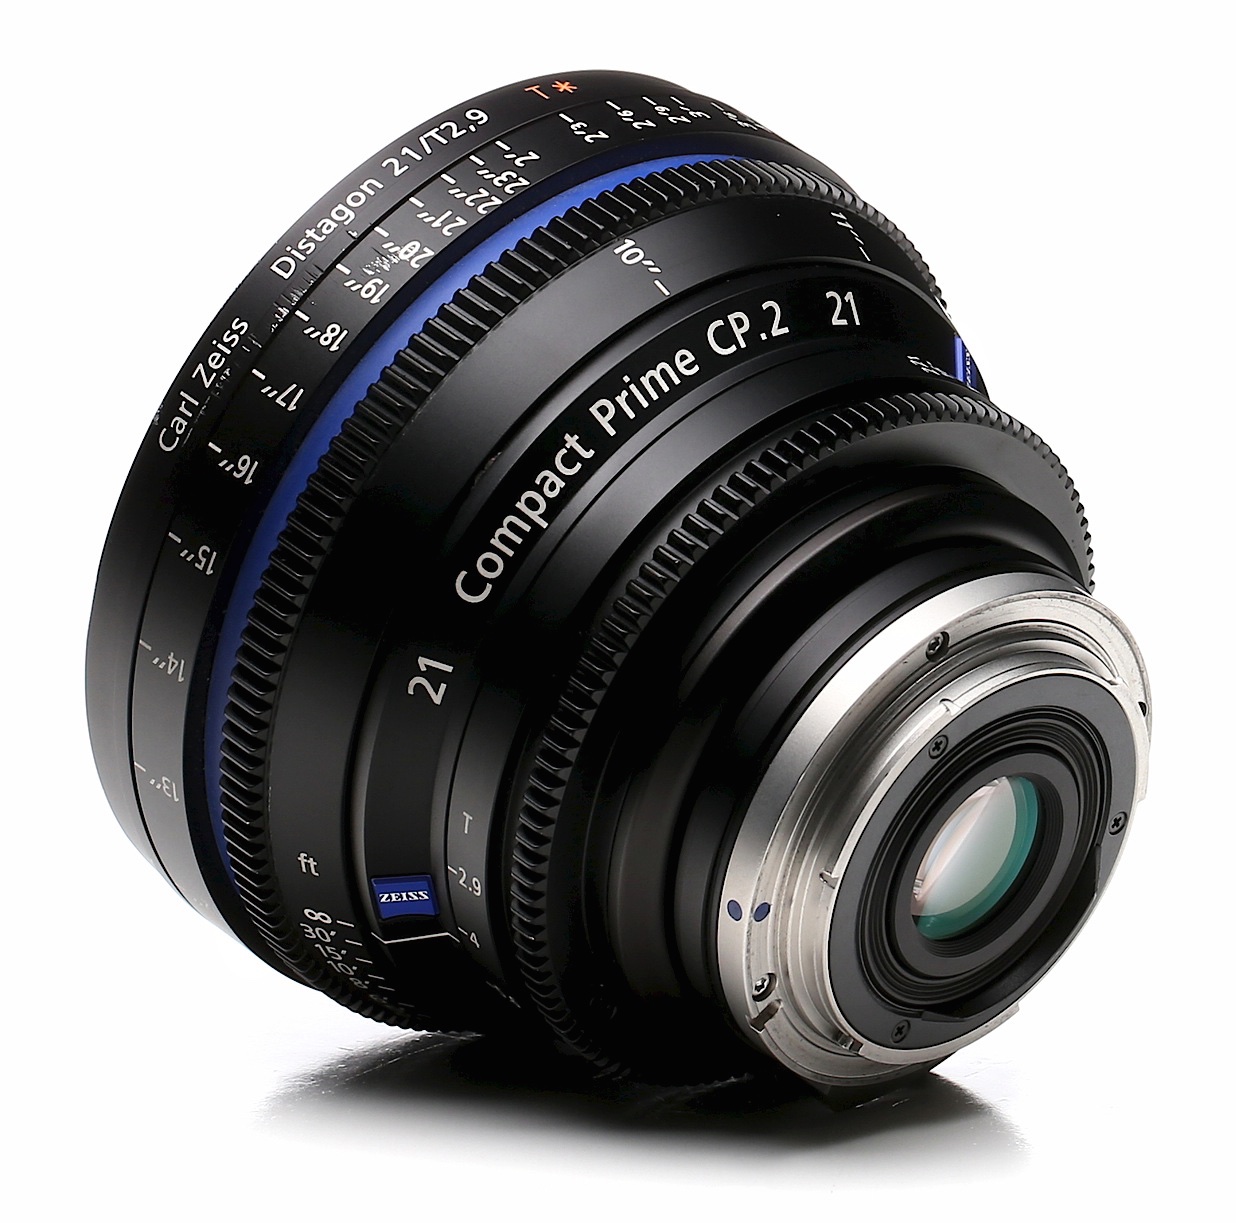 ZEISS Compact Prime CP.2 21mm T2.9